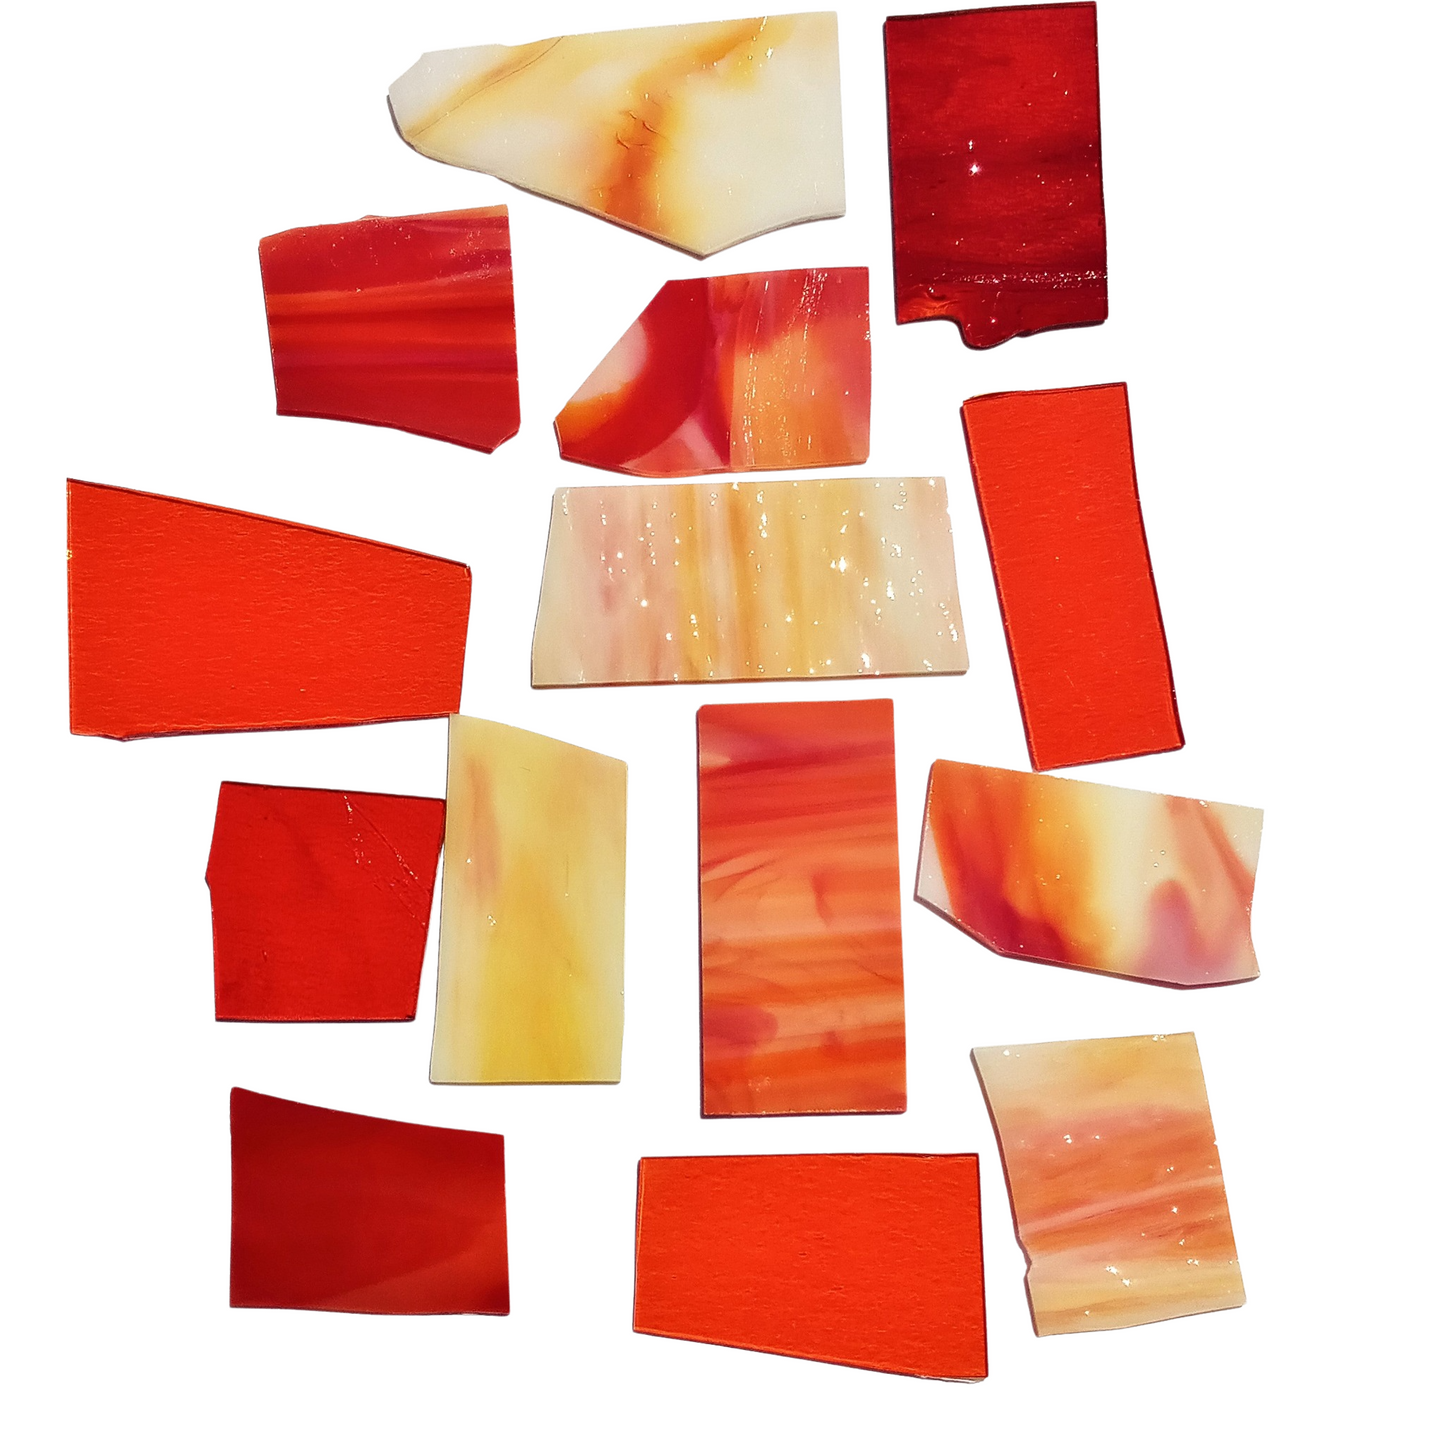  Bradstreet Glass Orange, Red, Yellow Stained Glass Scraps, 1 lb Package of Reclaimed Shop Scrap Glass in Shades of Orange